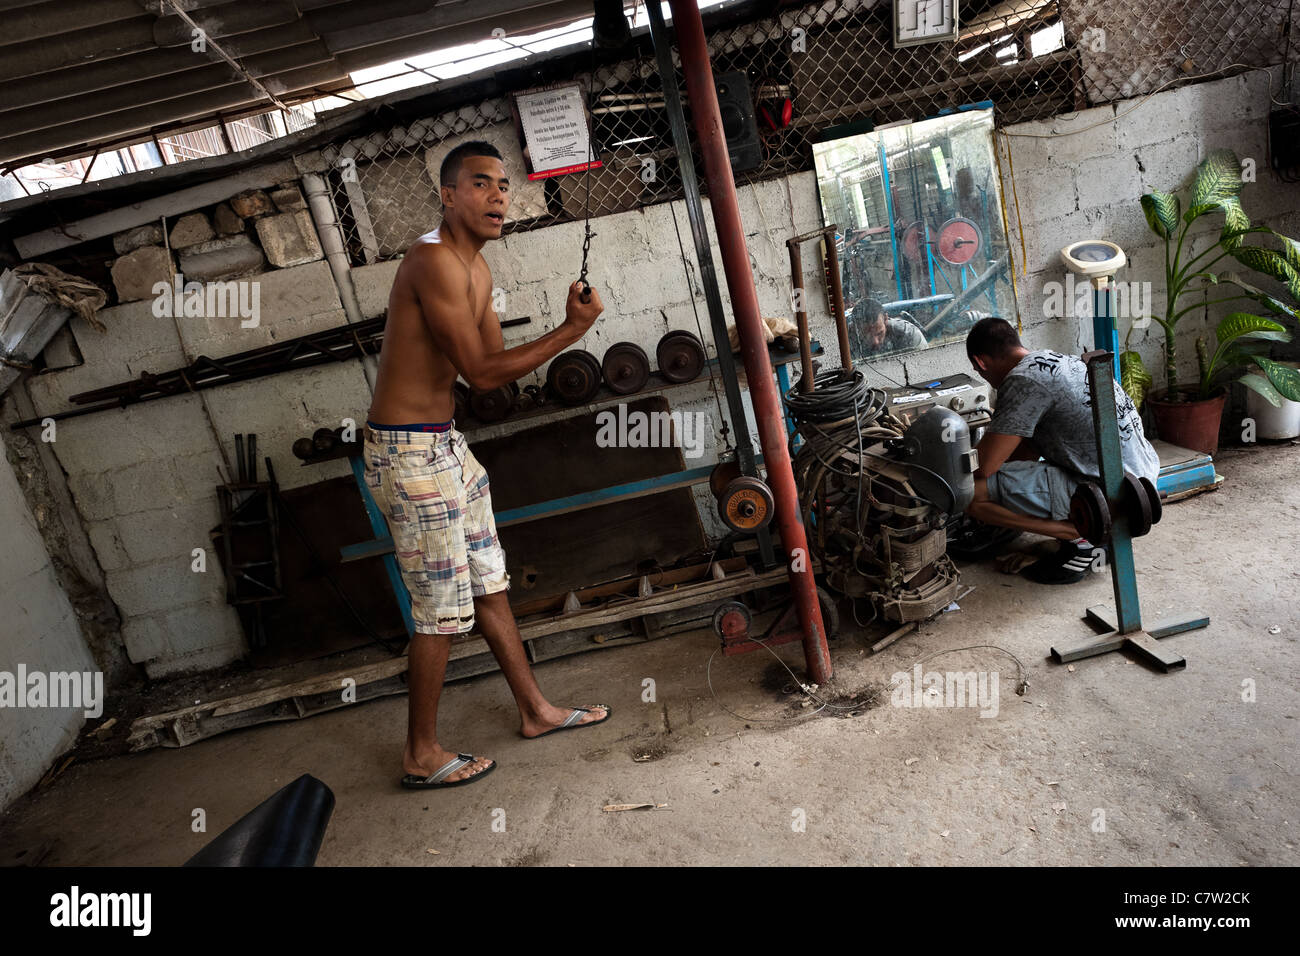 A young Cuban man does fitness exercise with barbells at a bodybuilding gym in Alamar, Havana, Cuba. Stock Photo